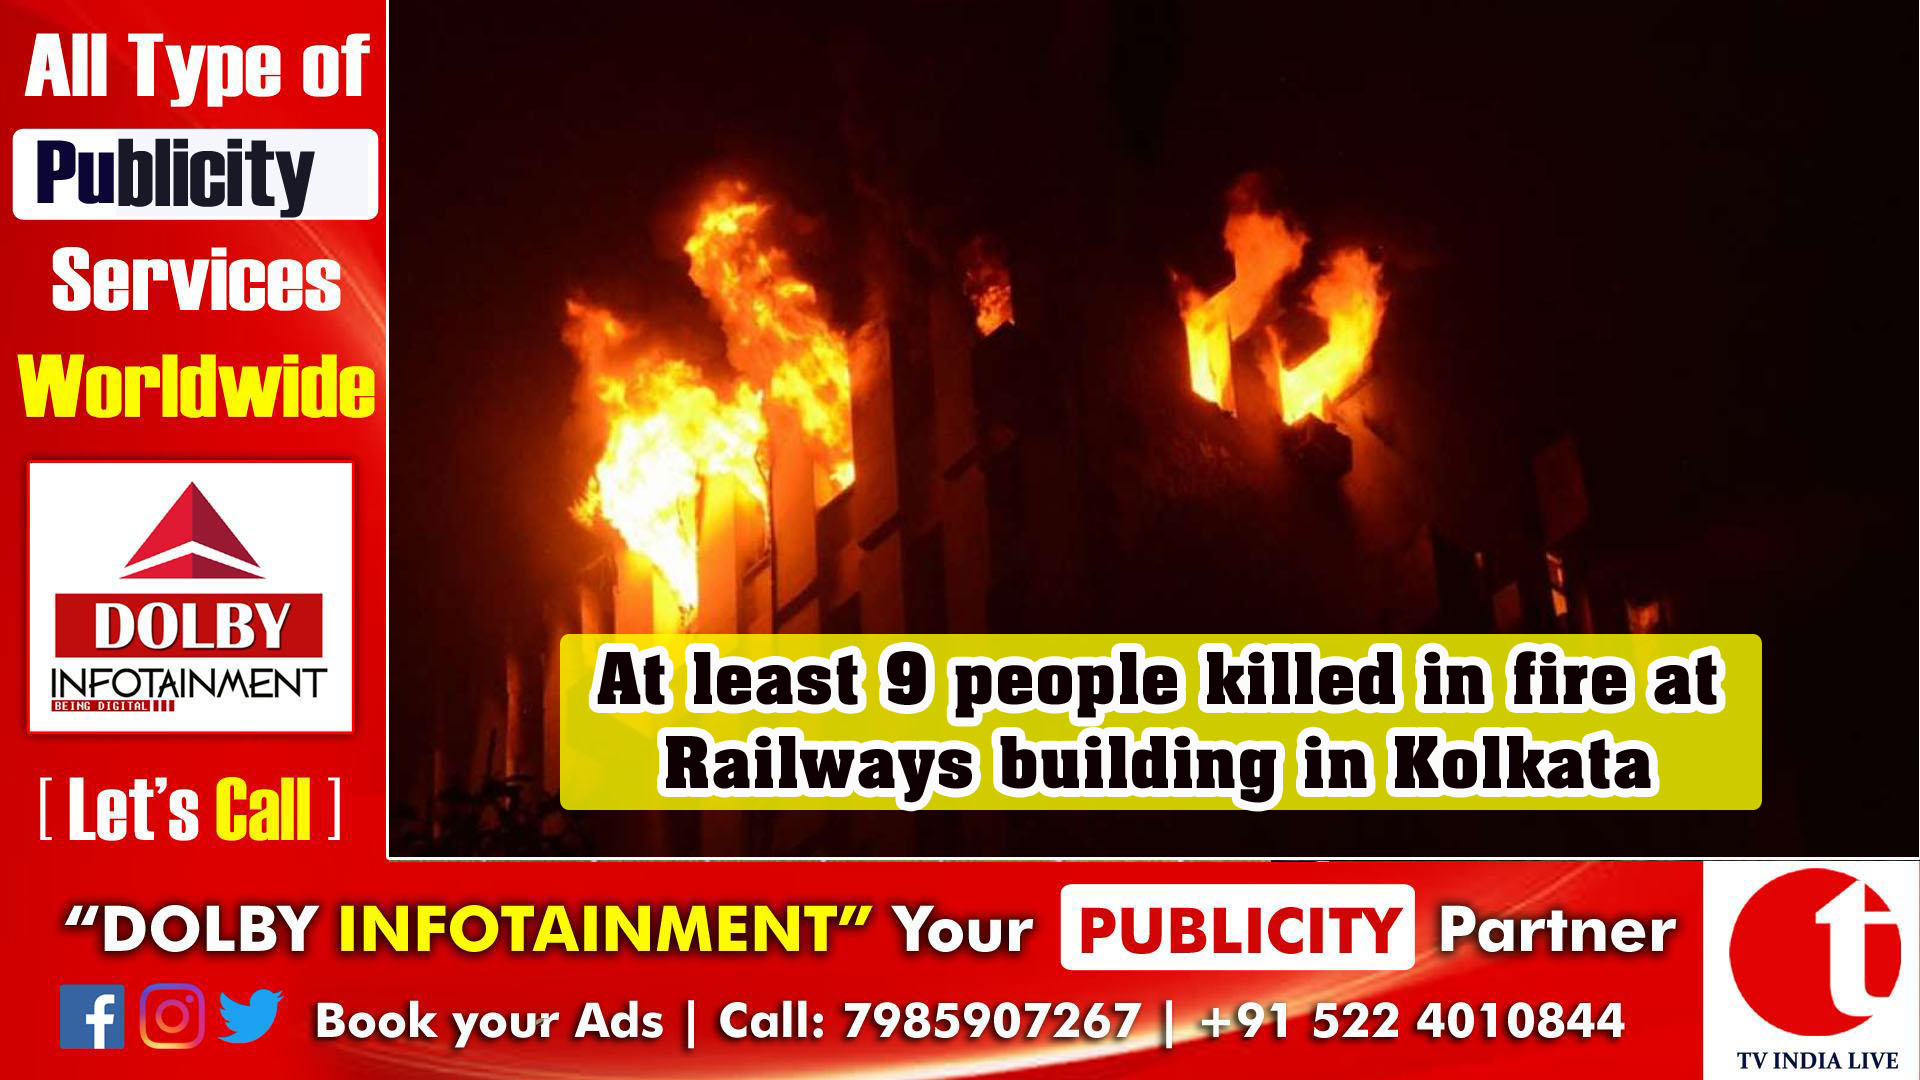 At least 9 people killed in fire at Railways building in Kolkata